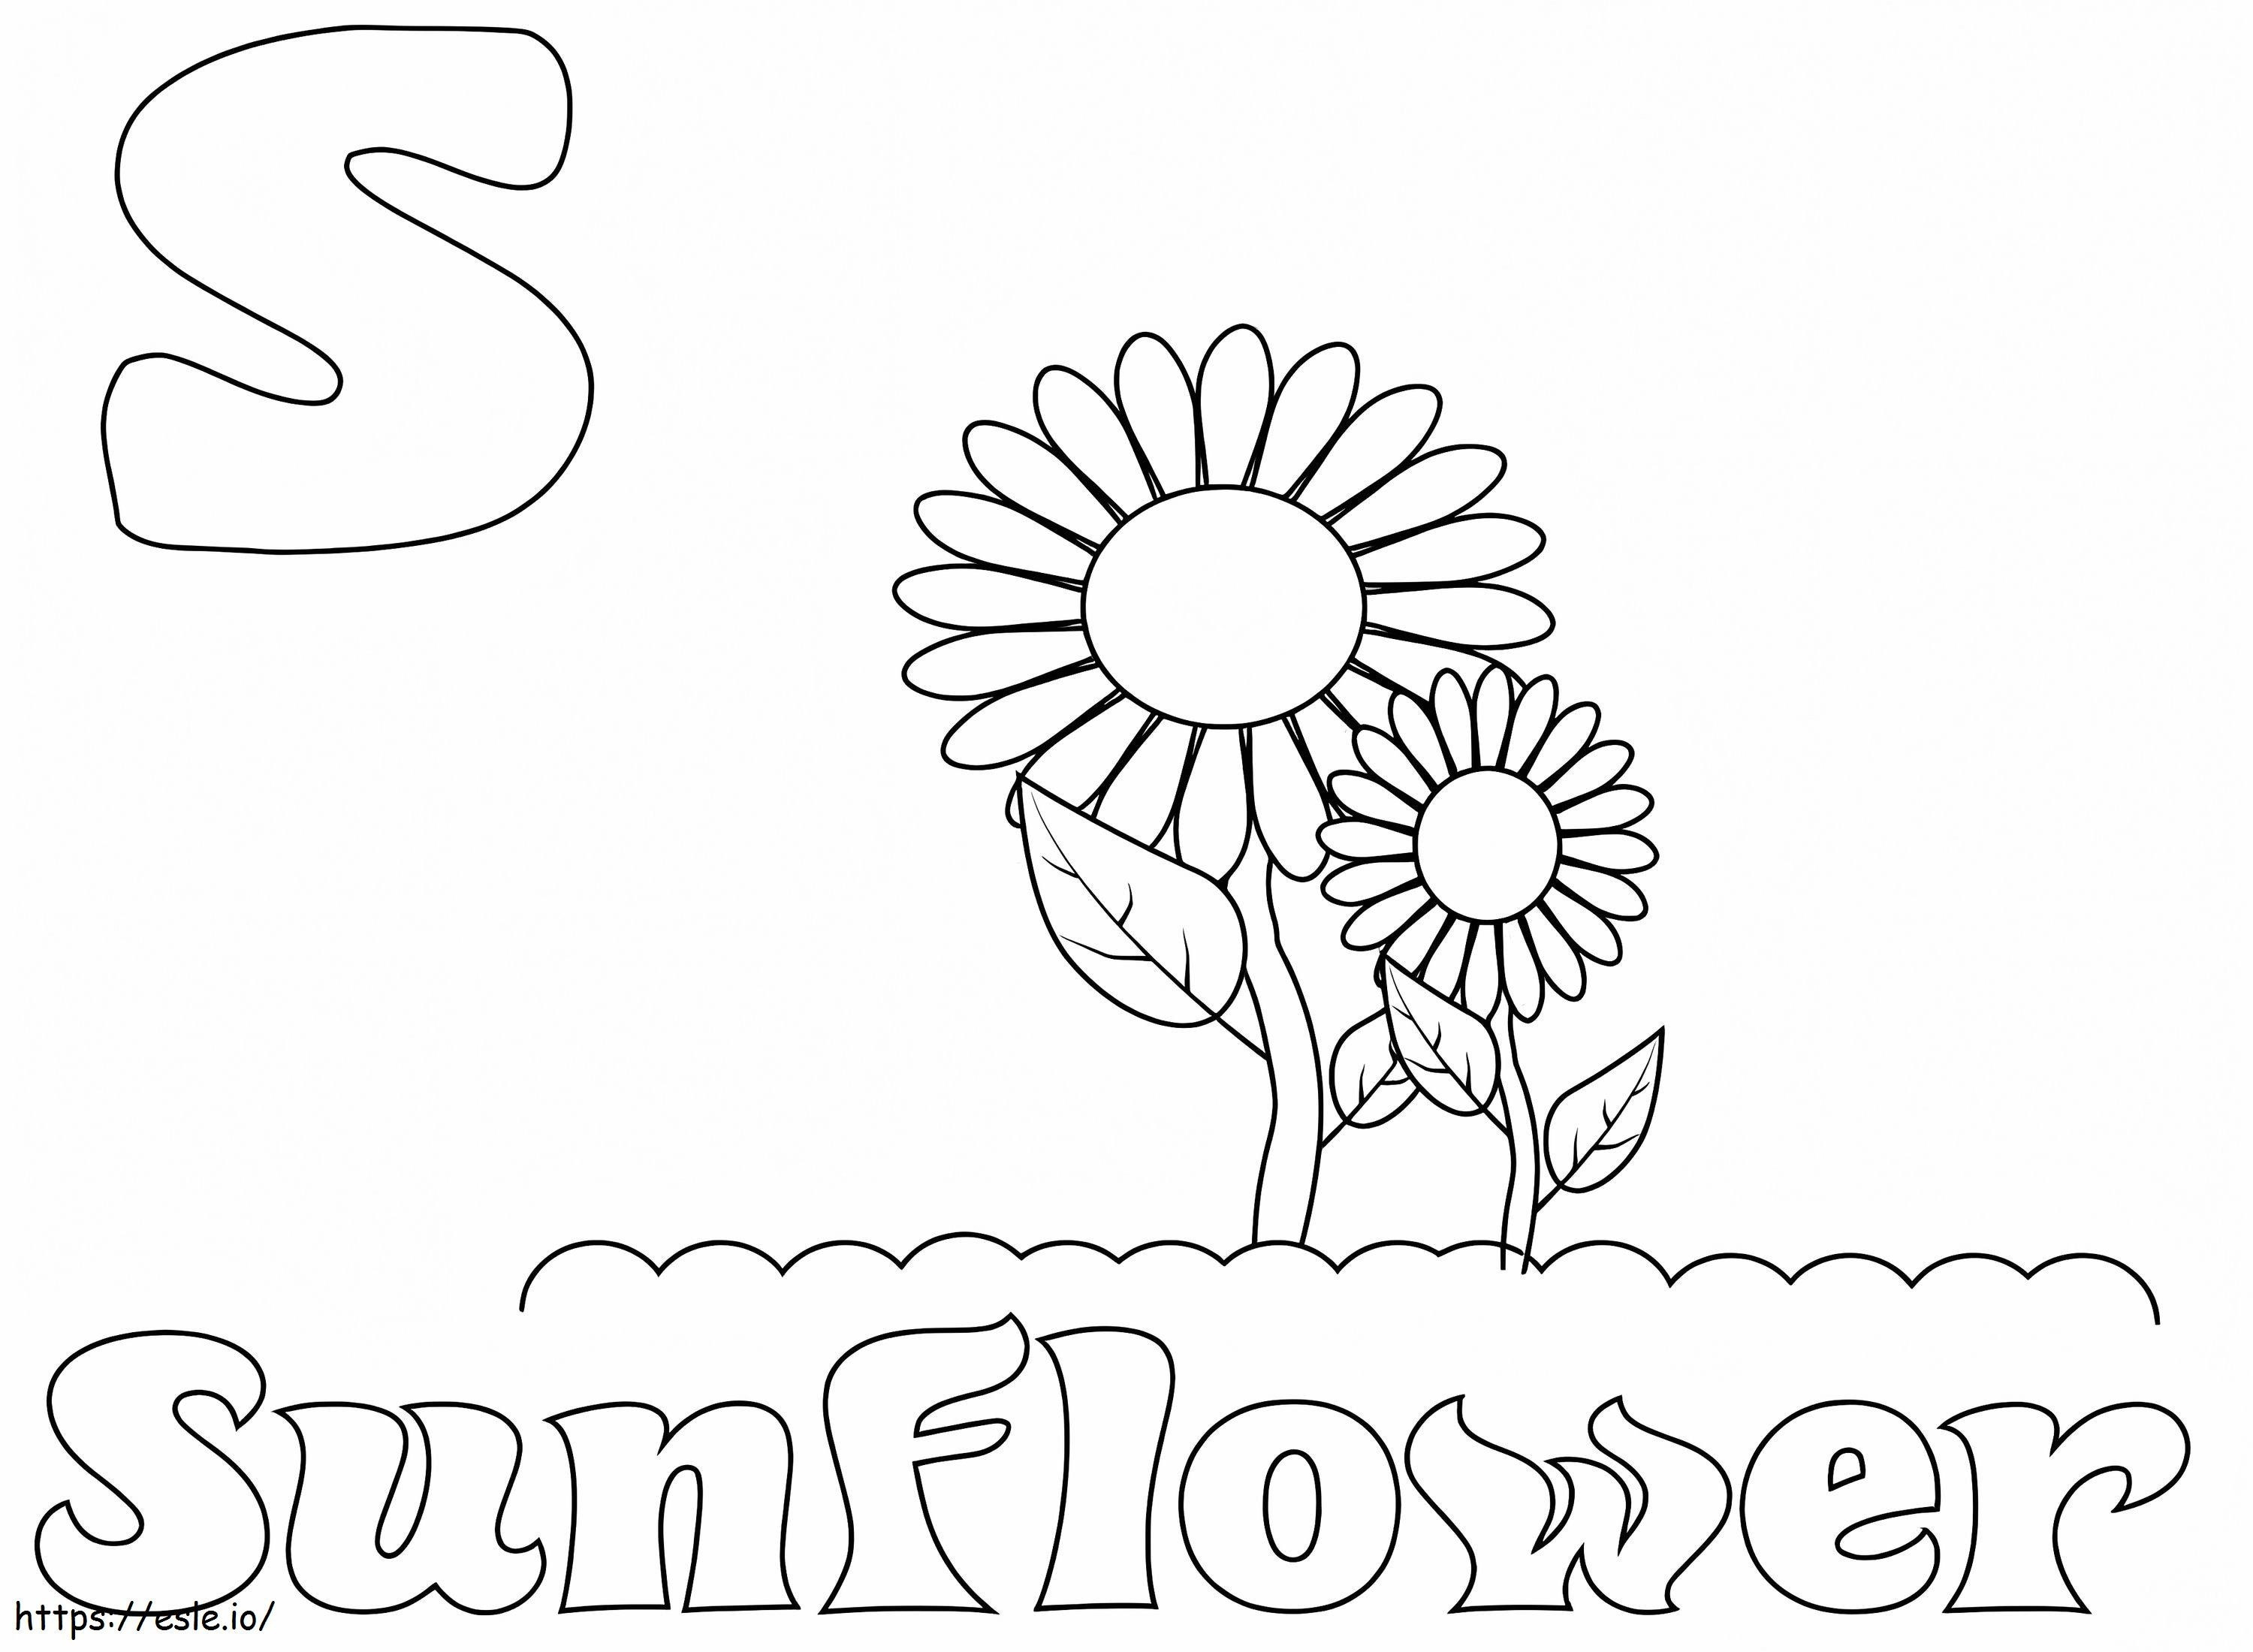 Sunflower Letter S coloring page